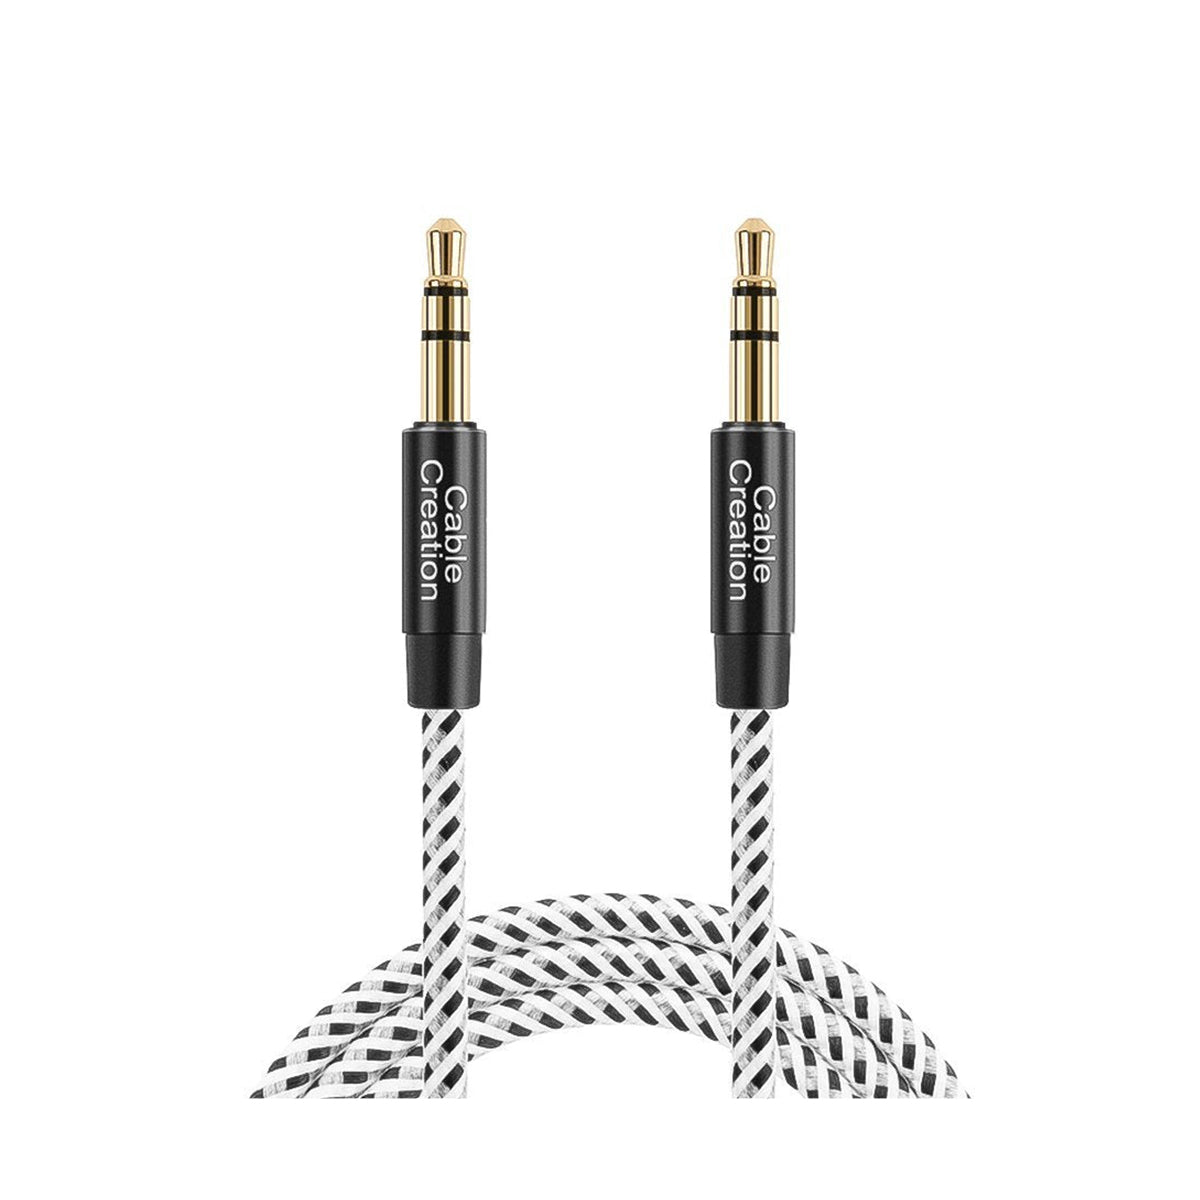 Are Audio AUX Cable And Audio Cable The Same?